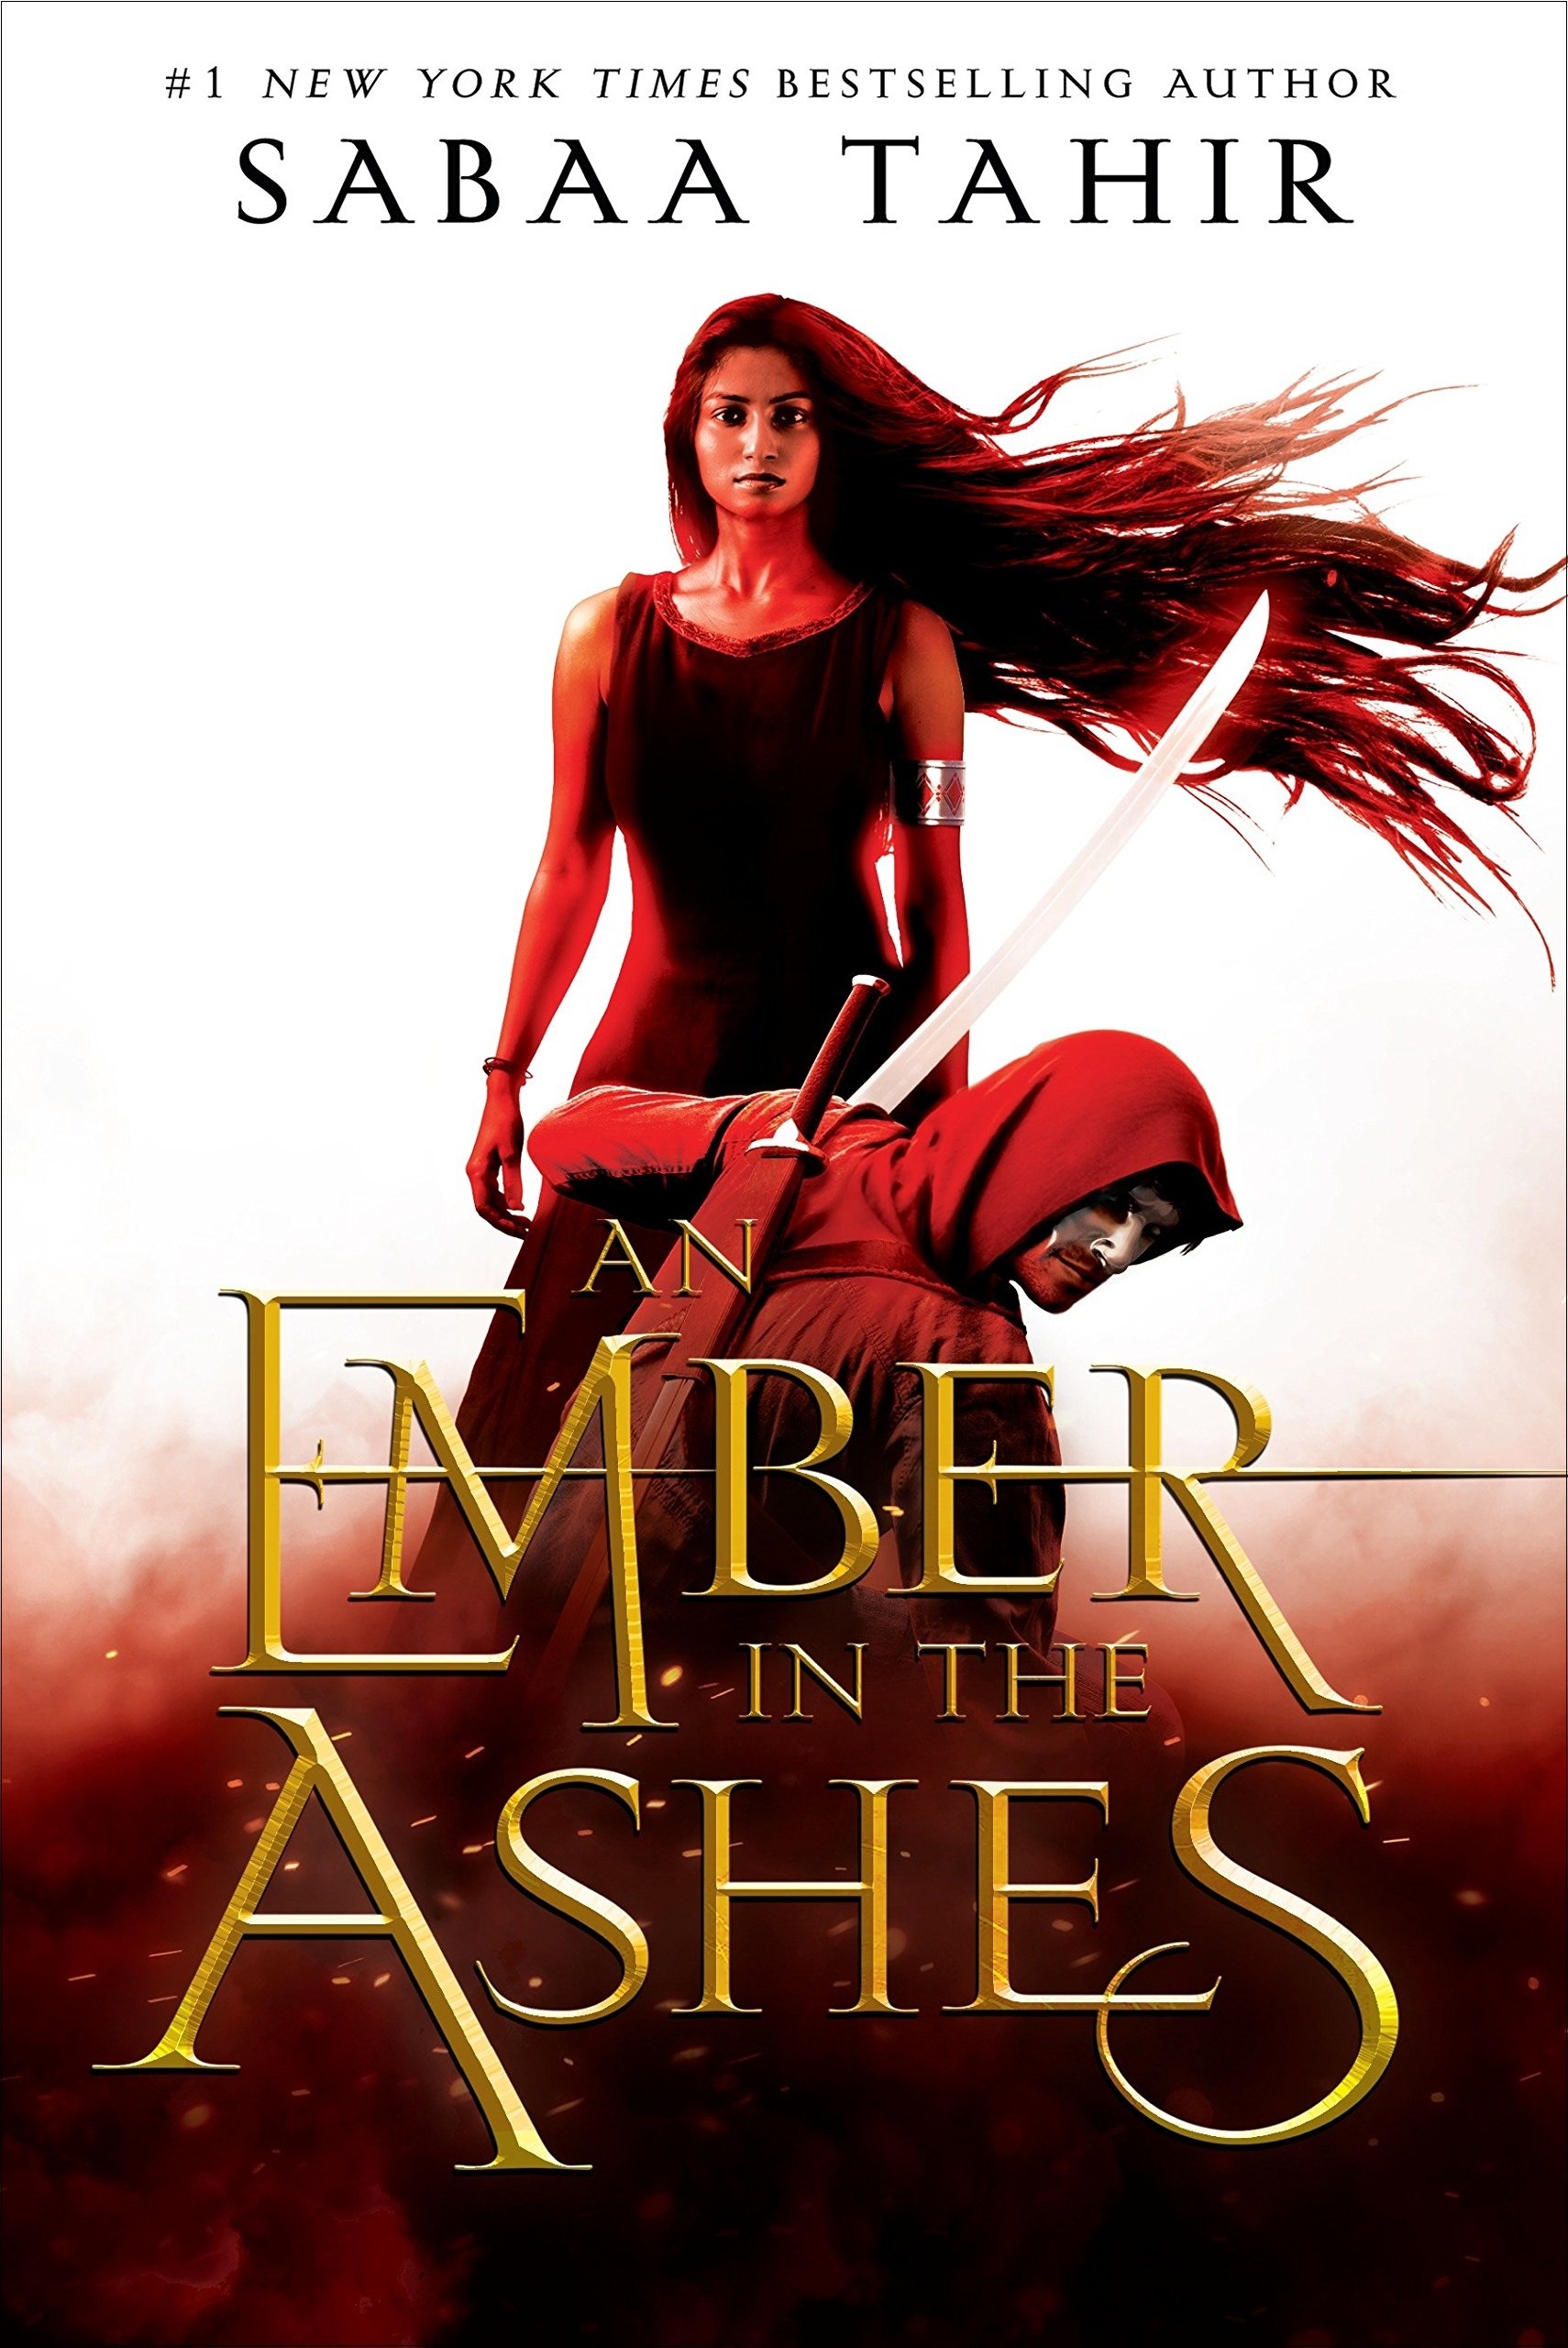 An Ember in the Ashes (New Release) - 4378038 , 9781595148049 , 341_150971 , 192000 , An-Ember-in-the-Ashes-New-Release-341_150971 , fahasa.com , An Ember in the Ashes (New Release)